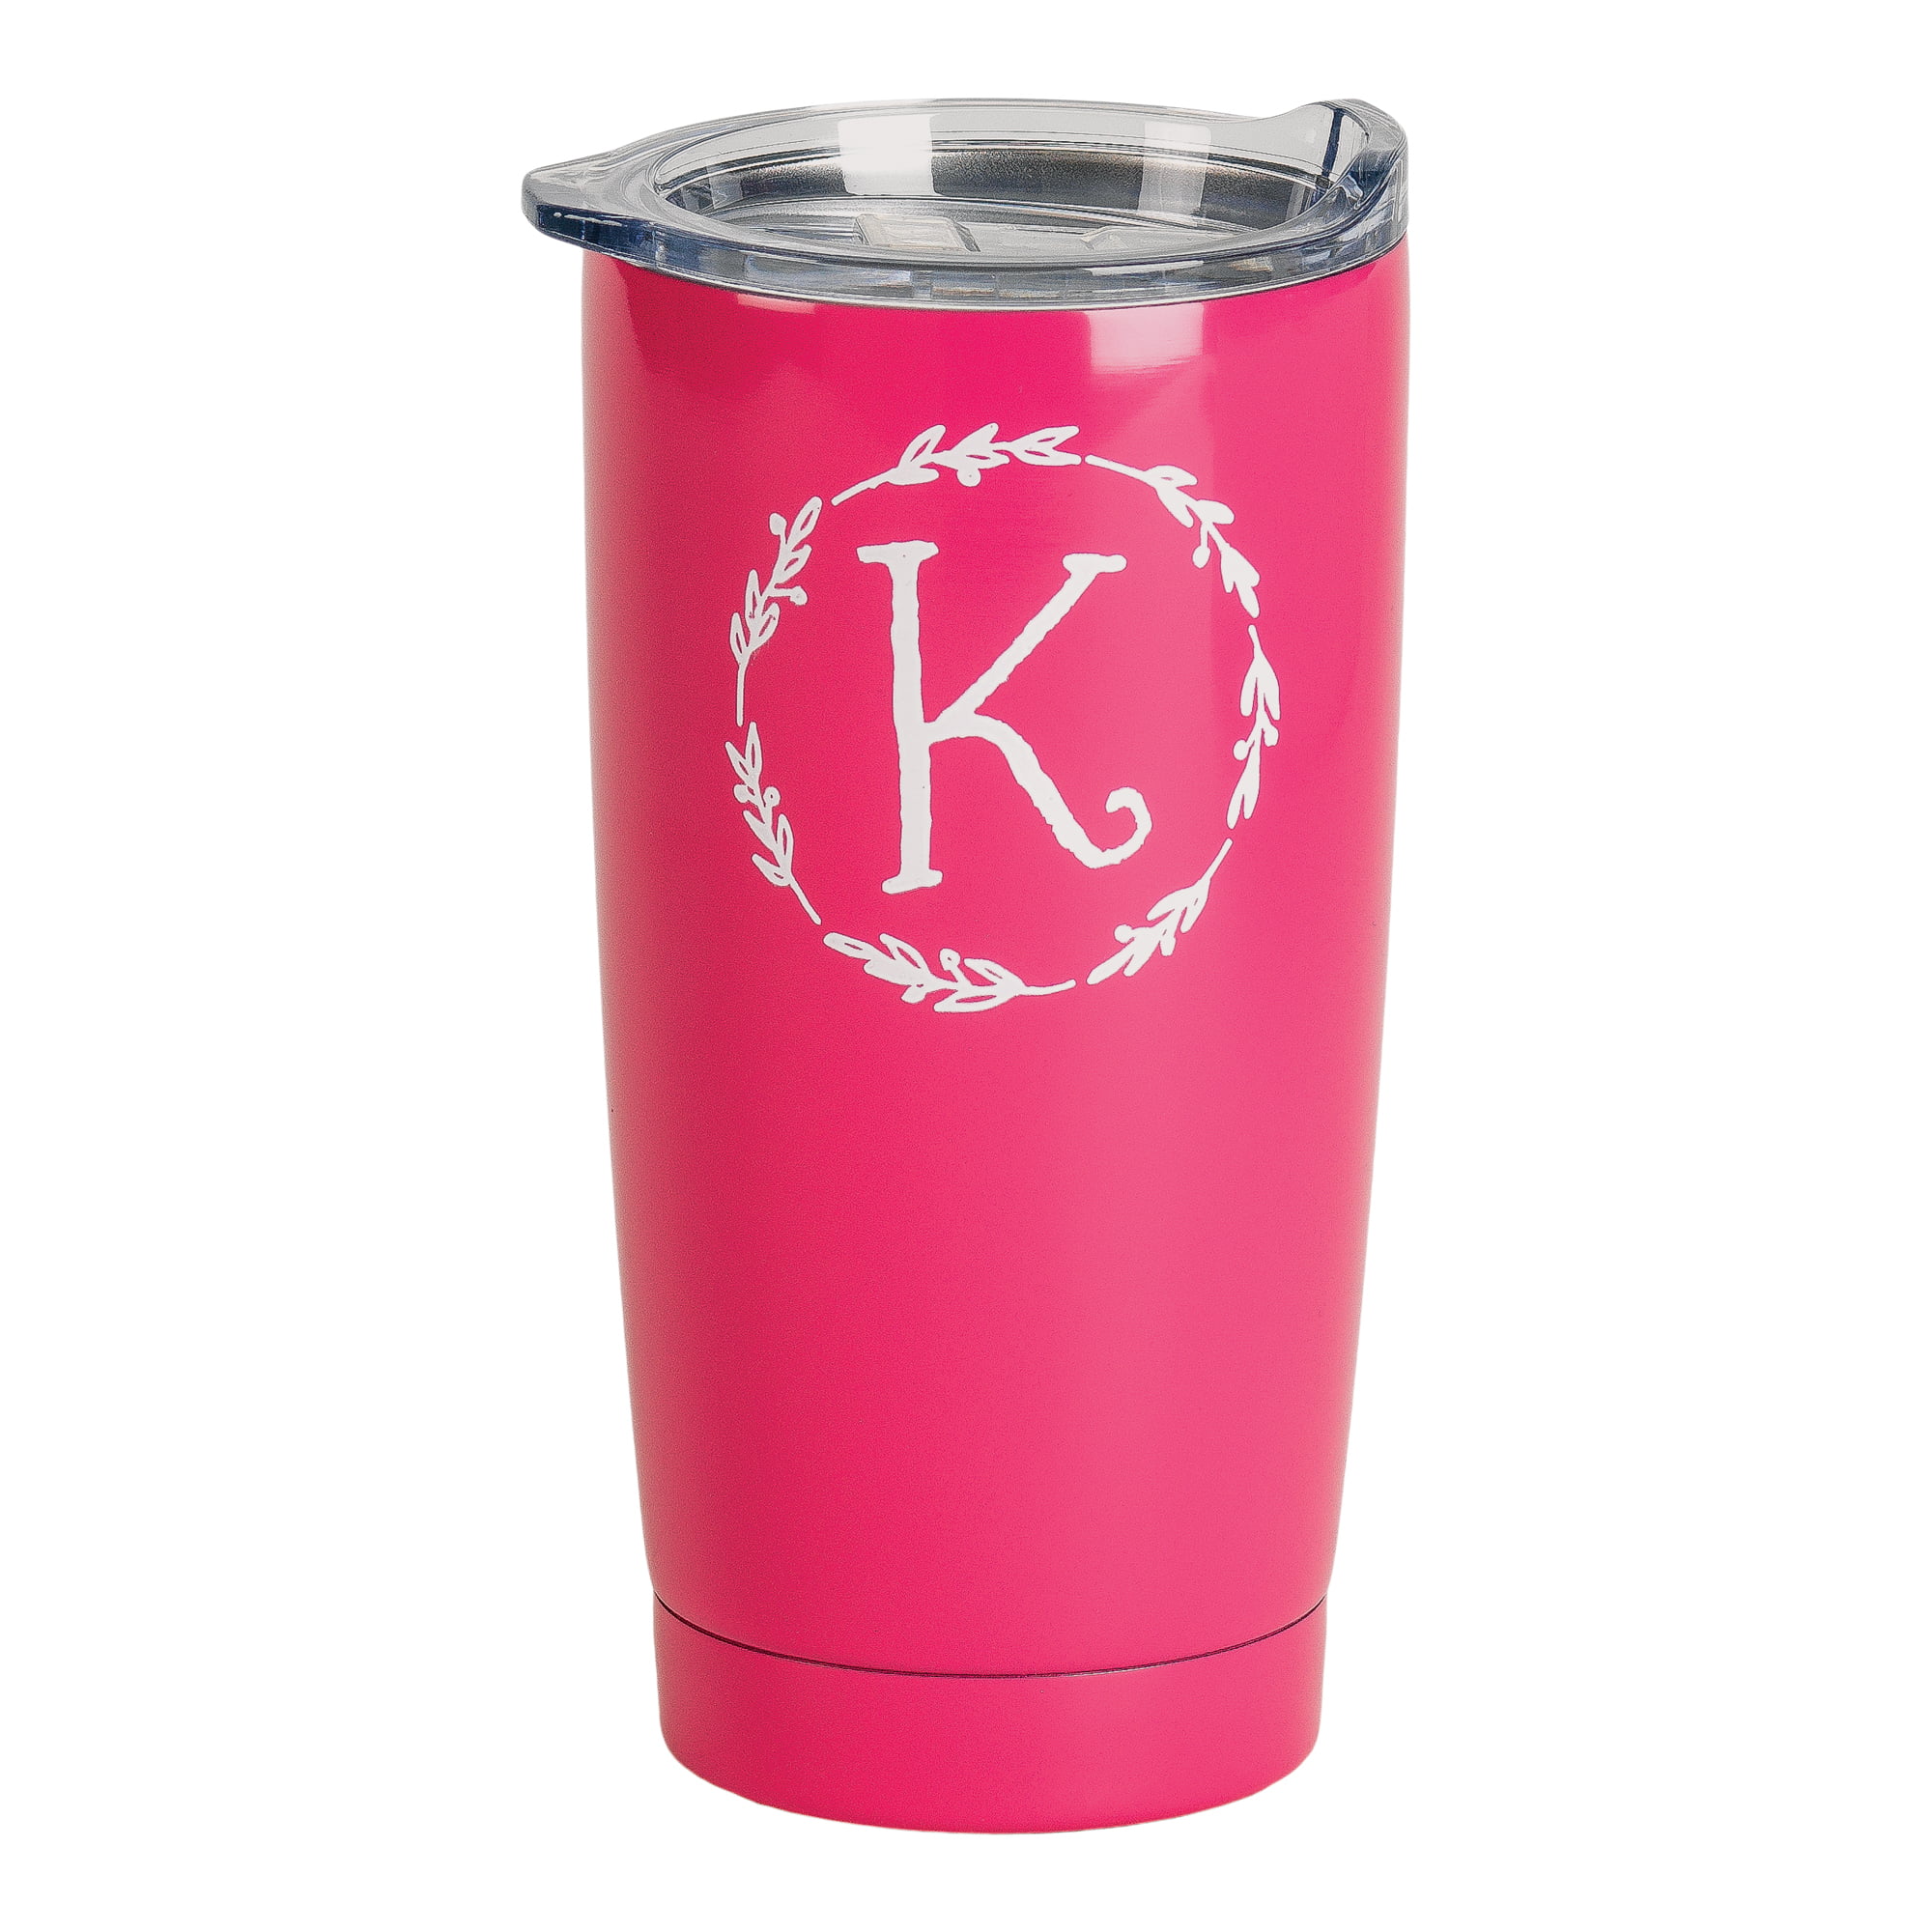 Tervis Hot and Cold Tumbler 24oz. Initial K Letter K Monogram w/ Pink Lid